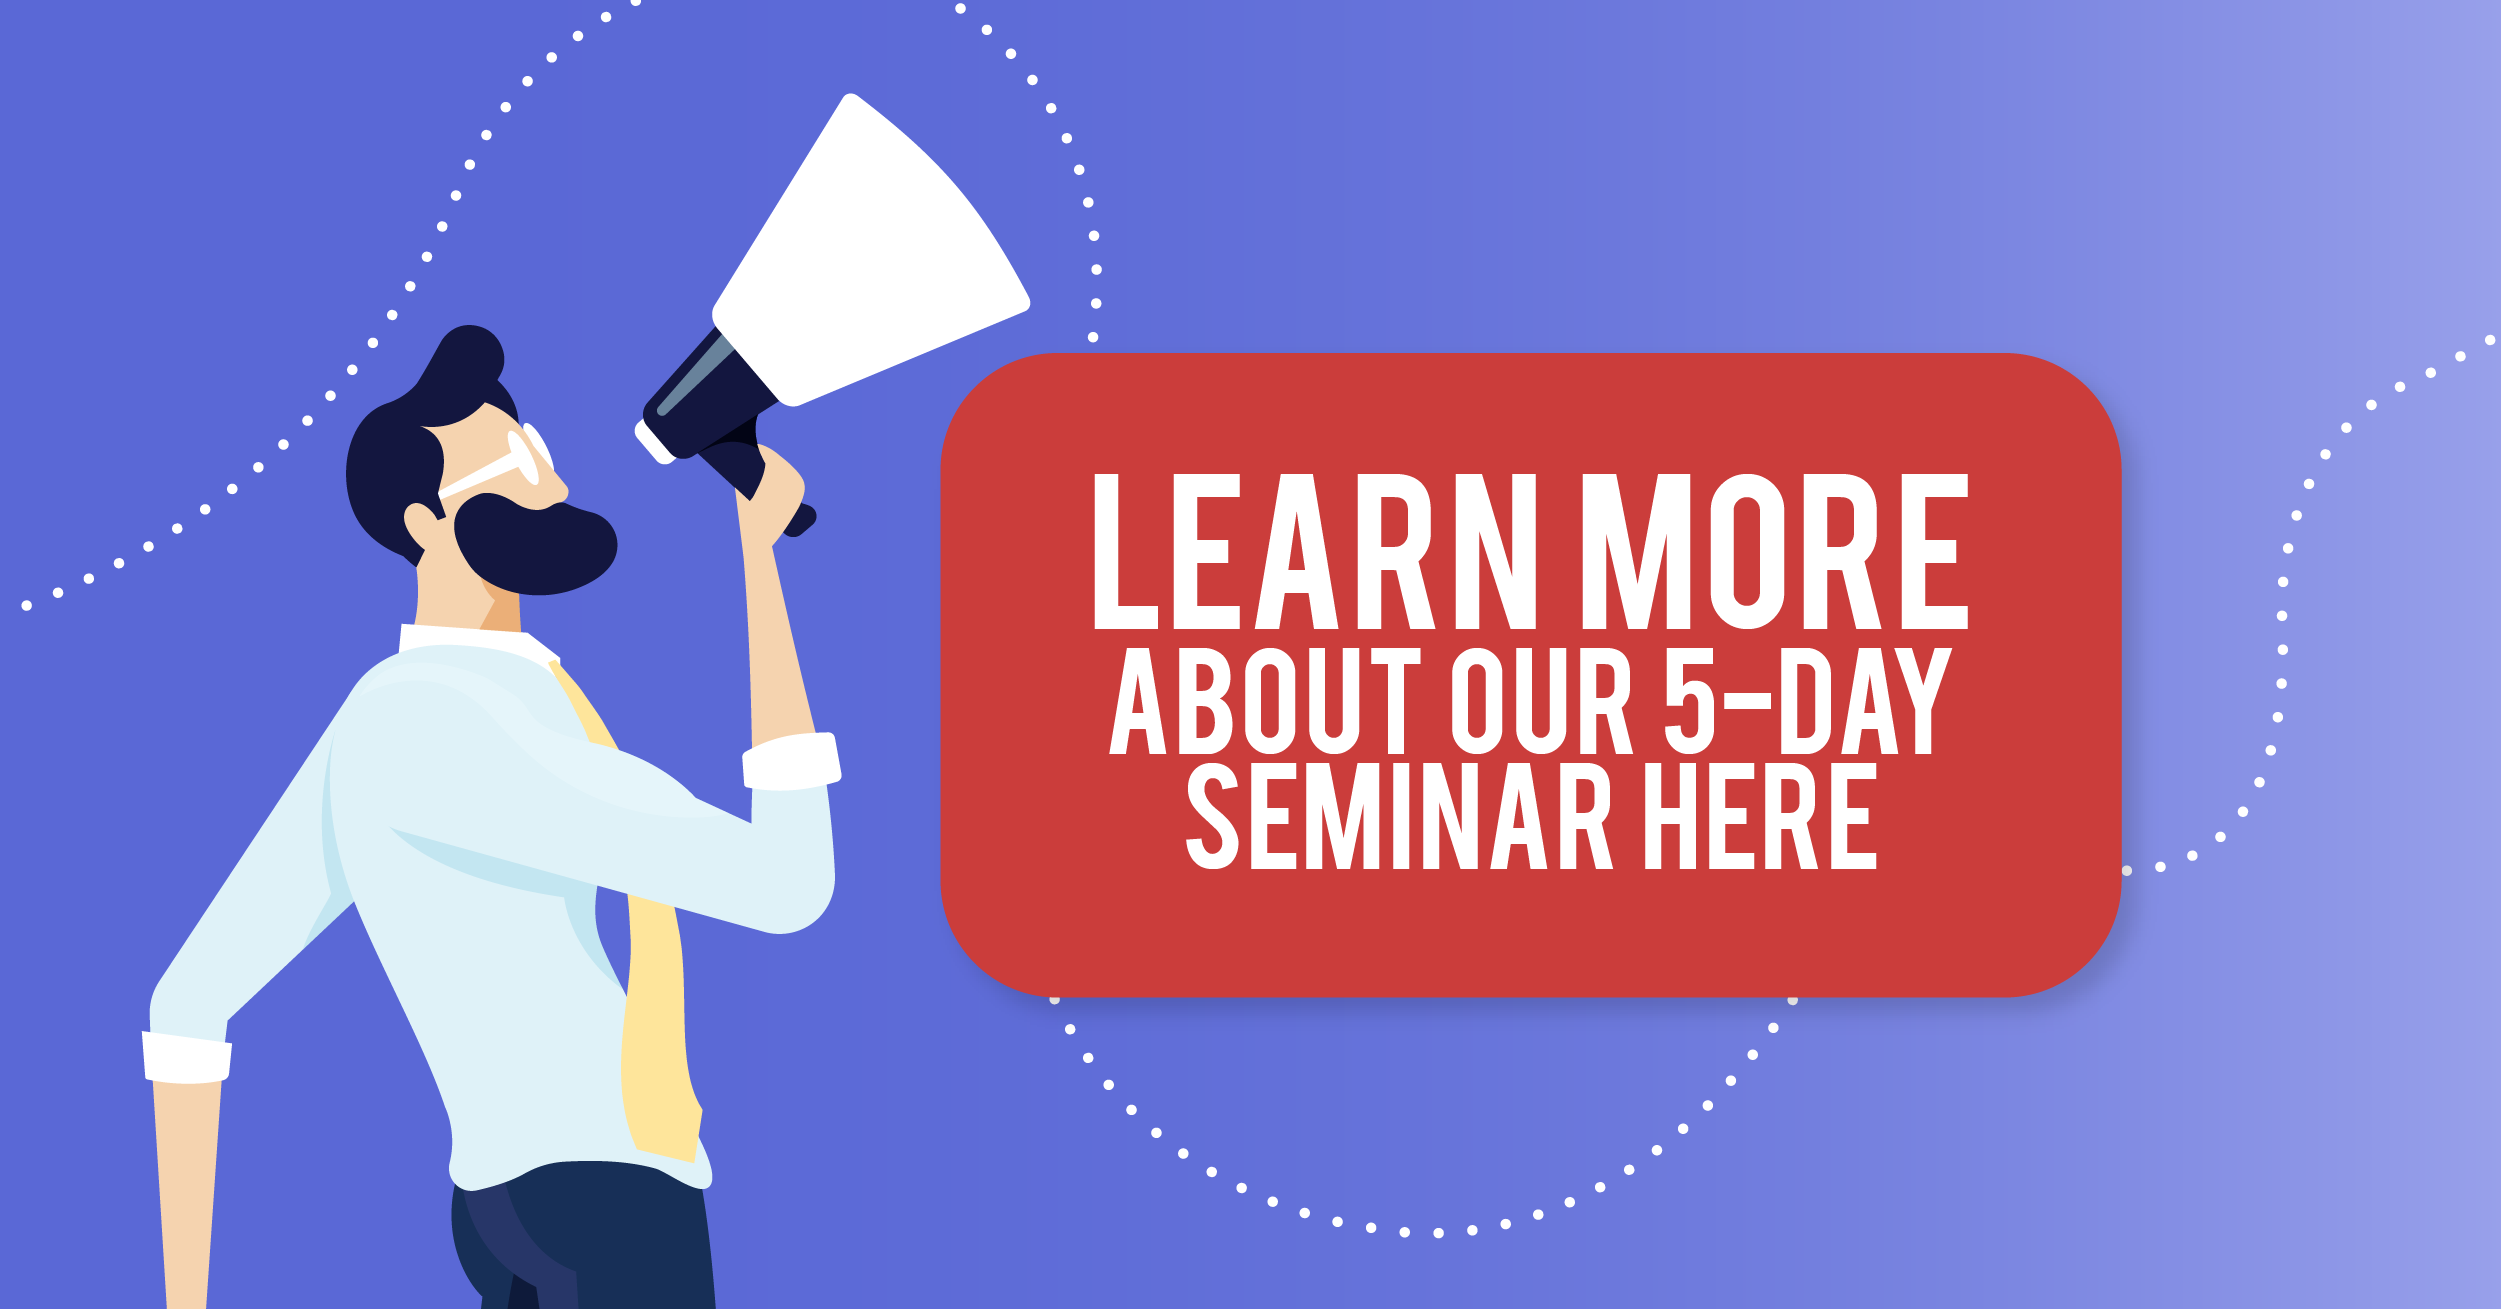 Learn more about our 5-day seminar here